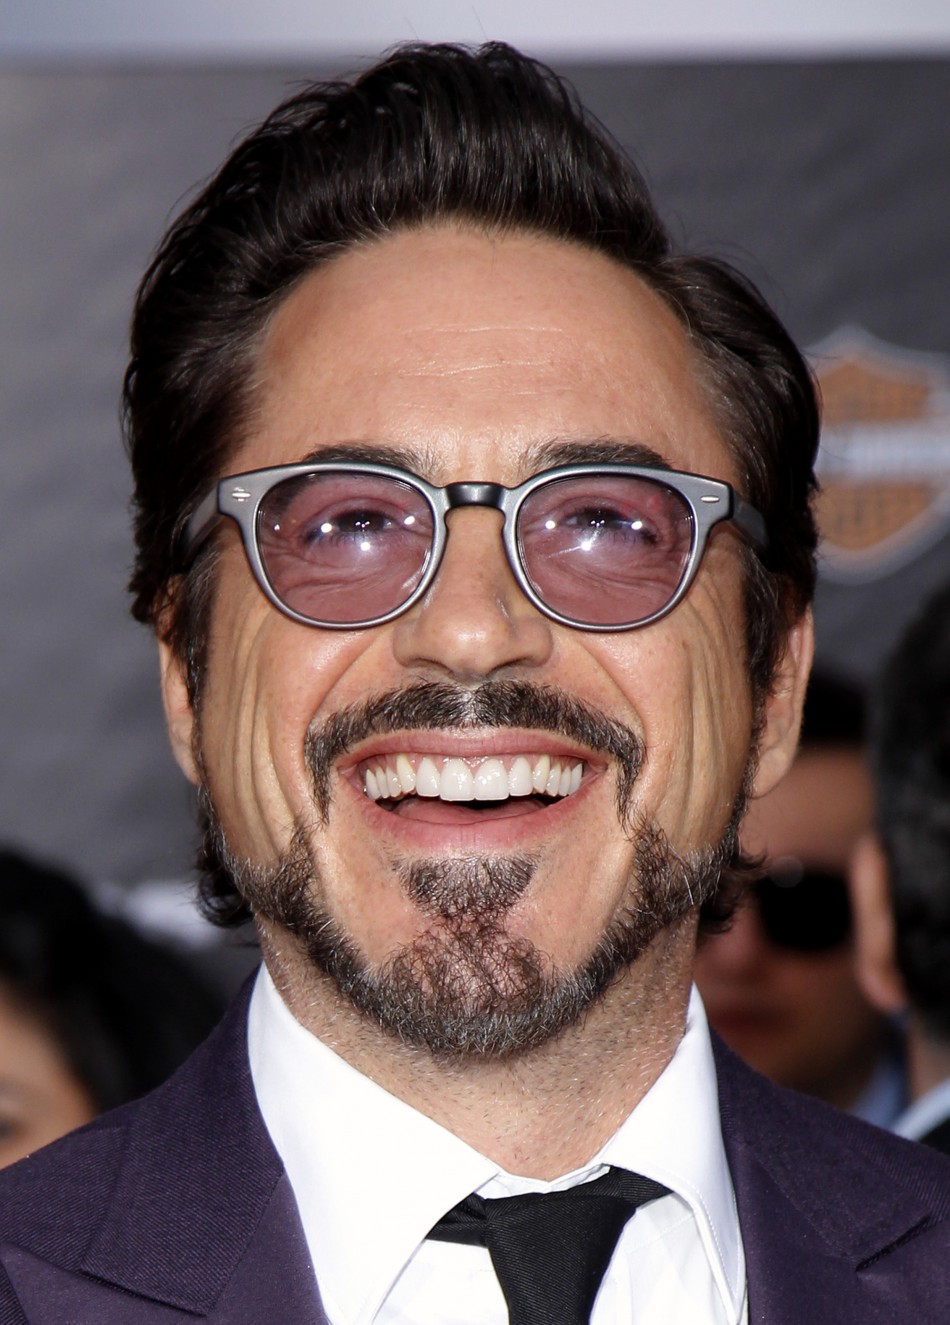 Cast member Downey Jr. poses at the world premiere of the film quotMarvels The Avengersquot in Hollywood, California